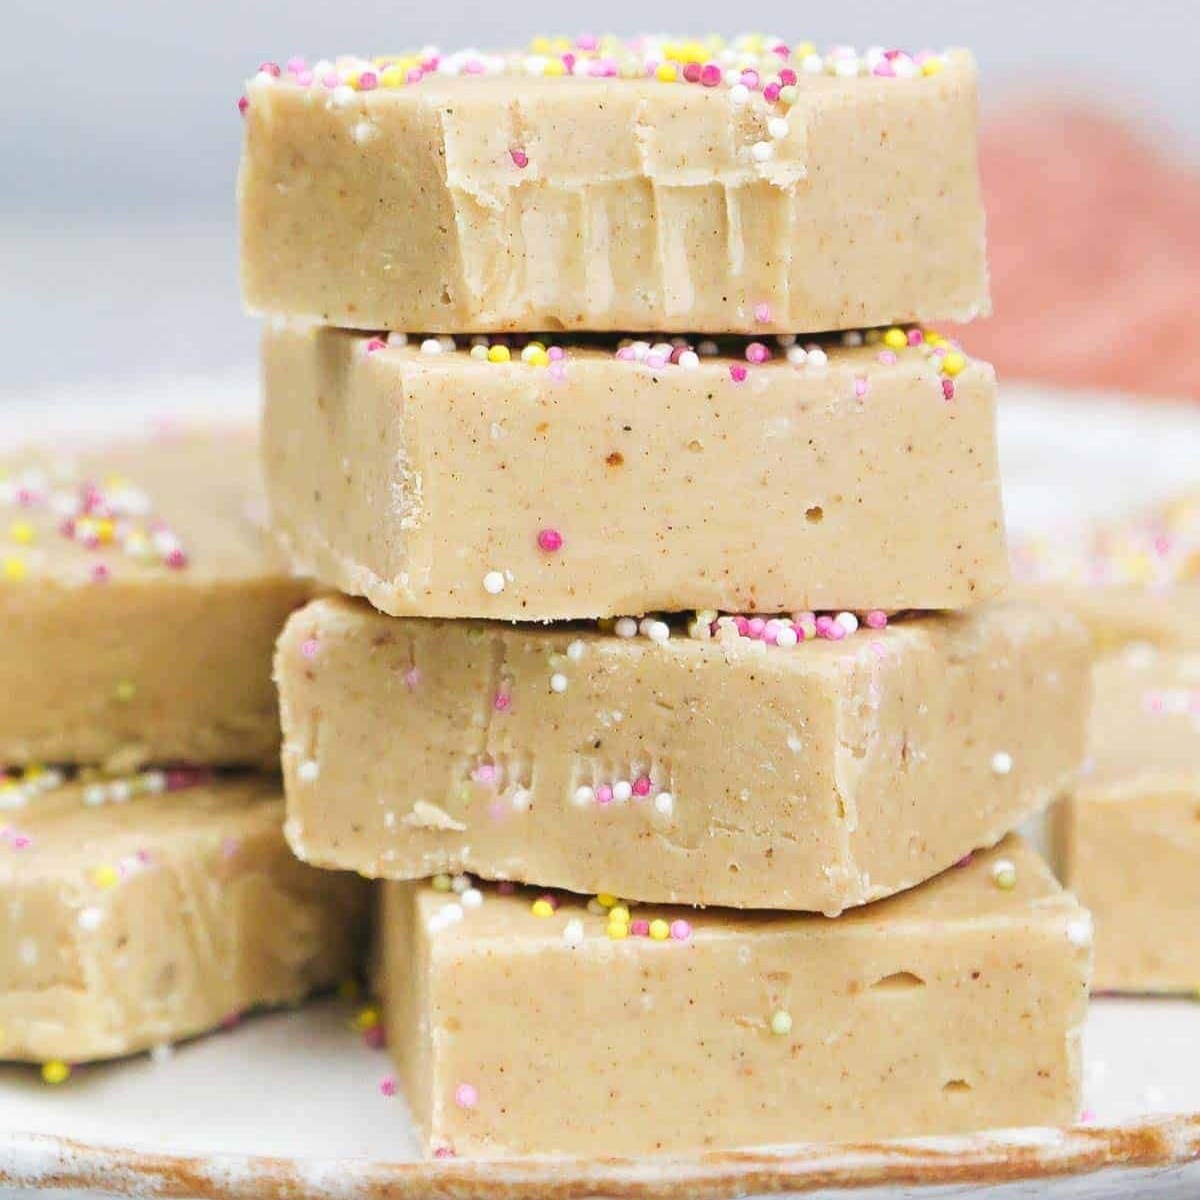 How To Store Fudge Made With Condensed Milk